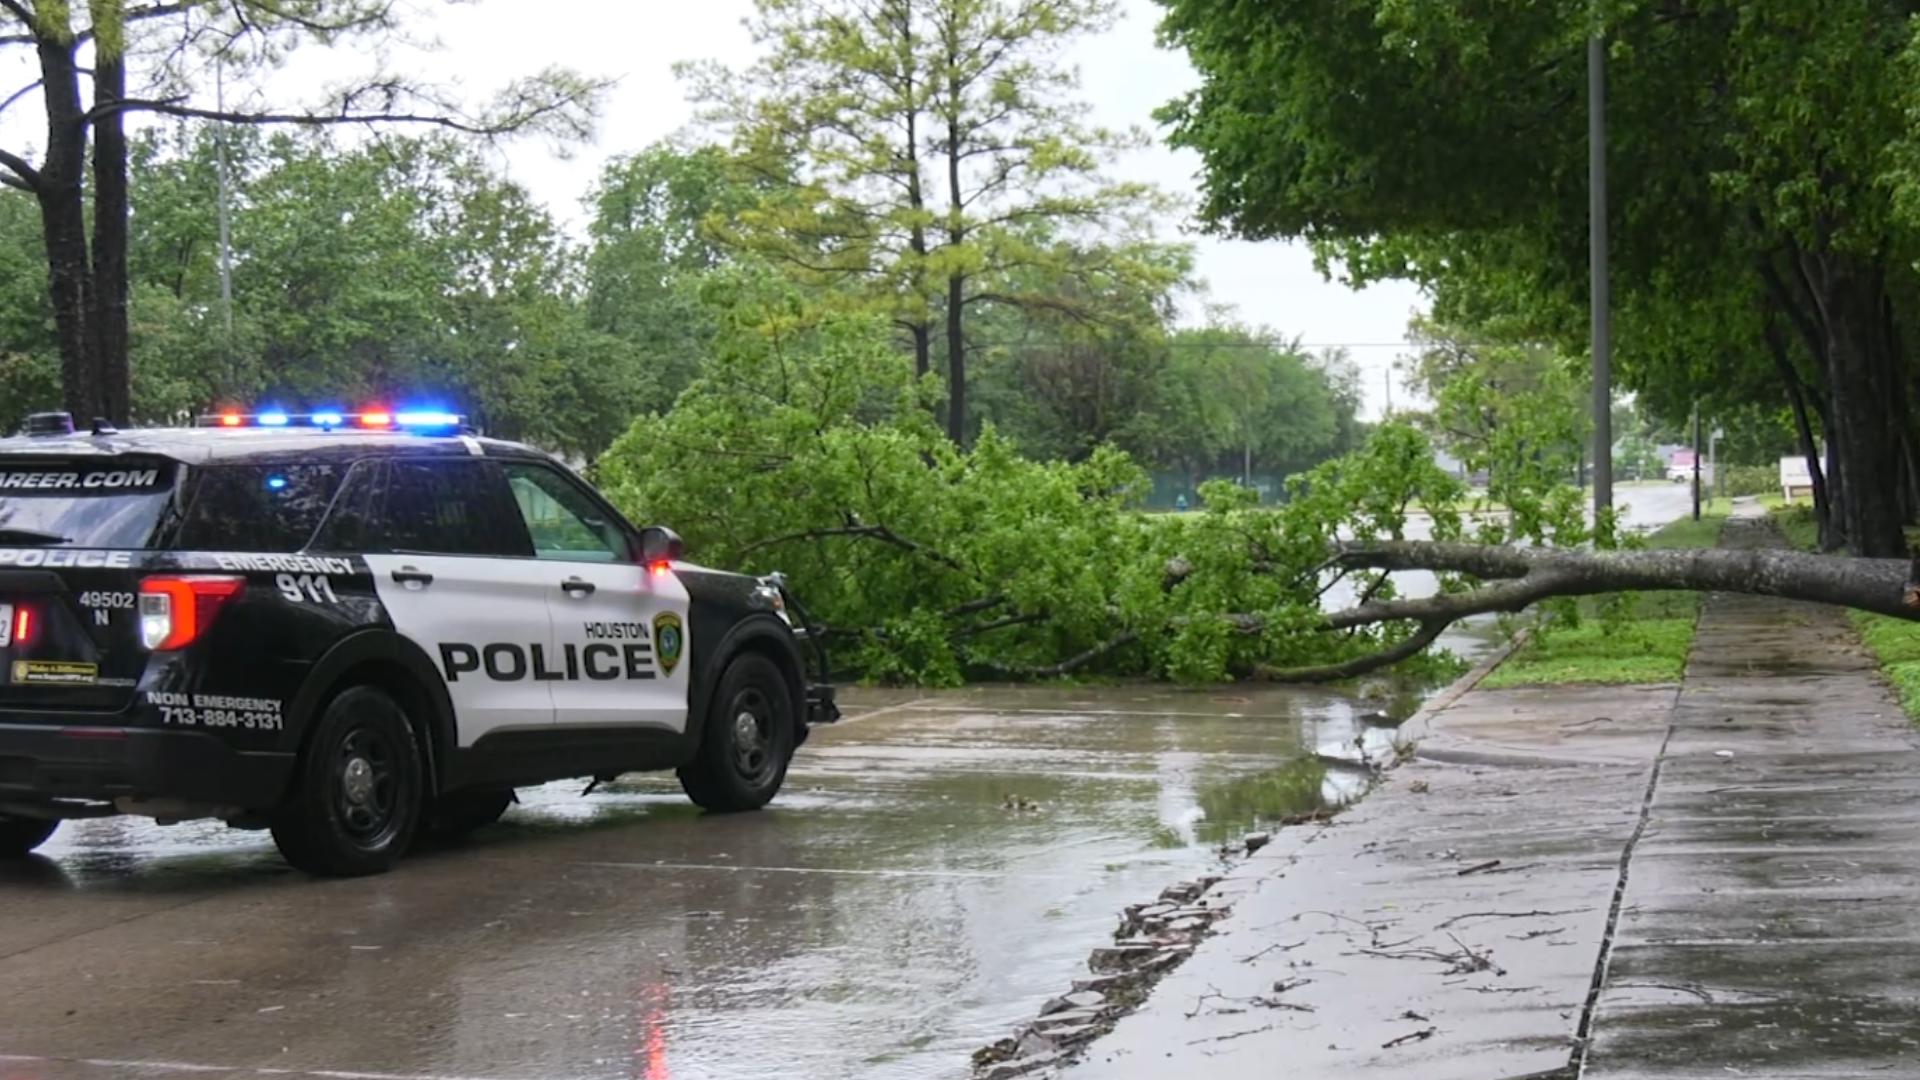 A tree brought down during Sunday morning's thunderstorm was blocking West 43rd St. near Citadel Lane.